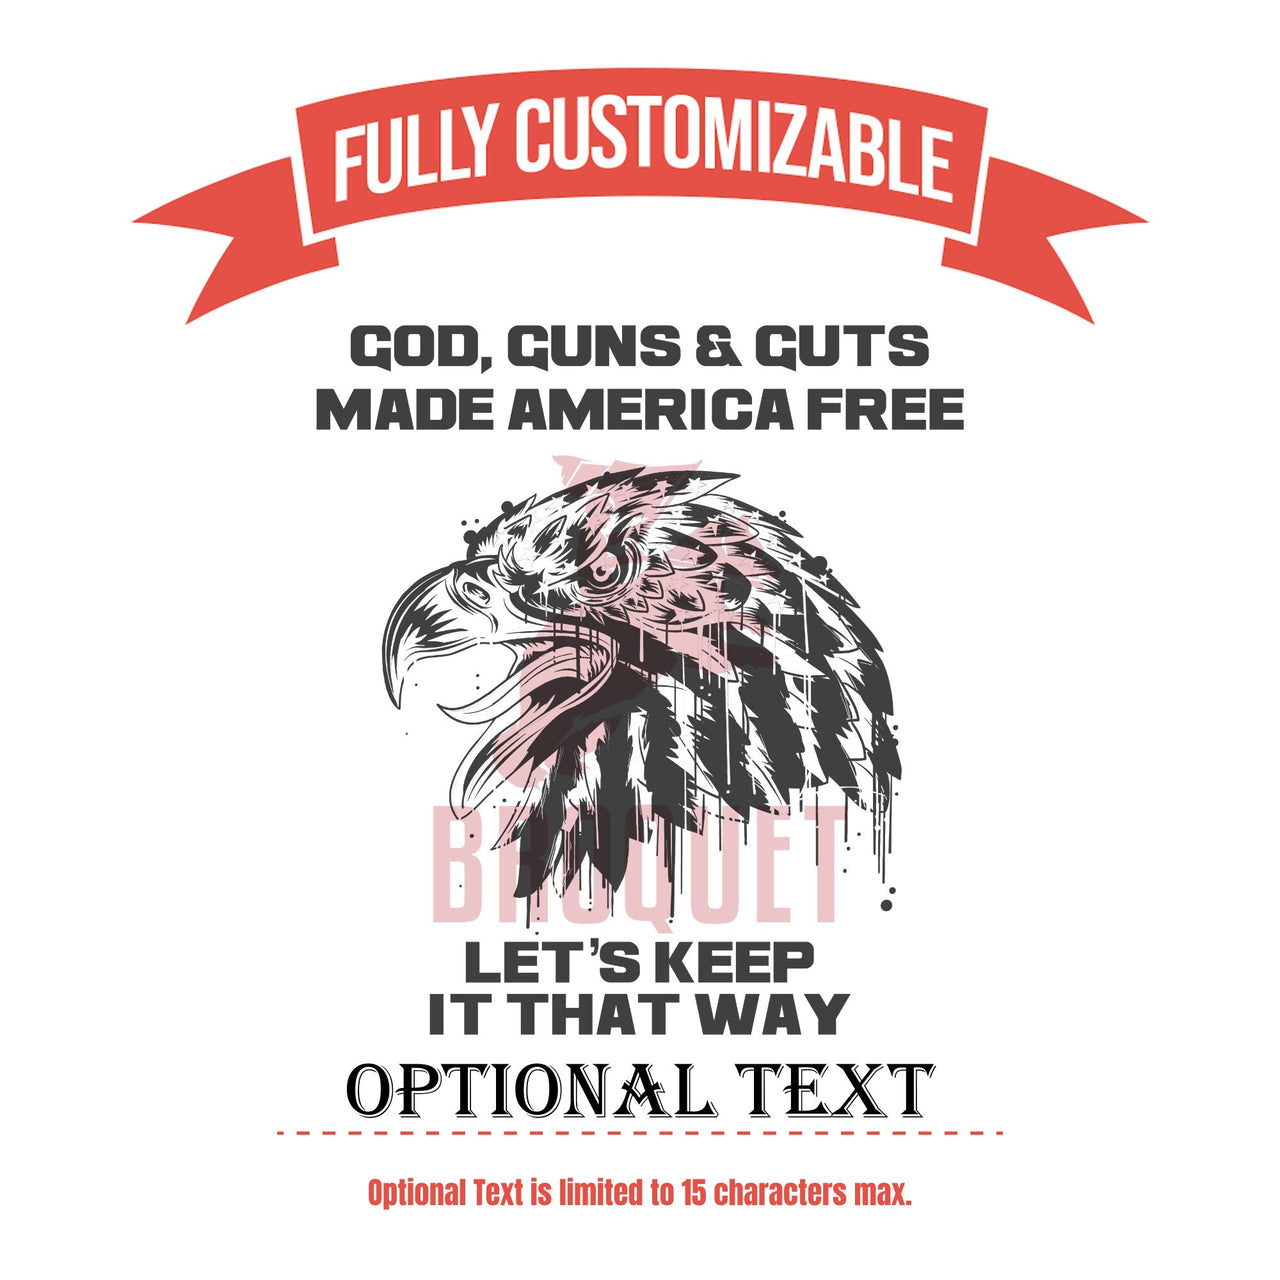 God, Guns & Guts Beer Glass, Custom Patriotic Whiskey Glass Made America Free, American Flag Let's Keep It That Way Wine Glass, Shot Glass